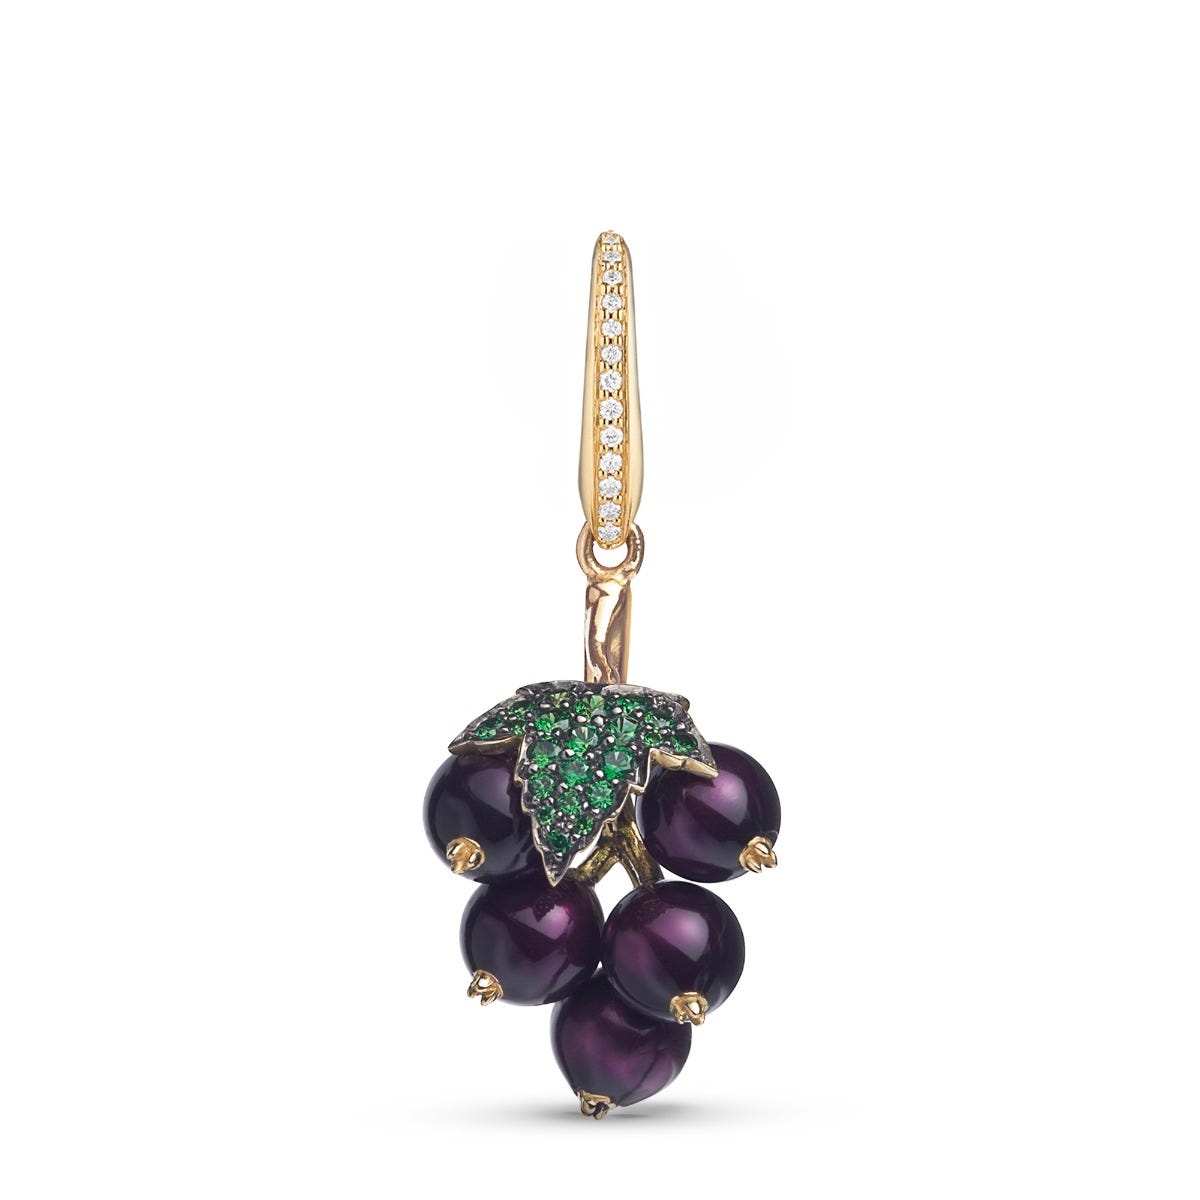 Woodland Blackcurrant Charm in Enamelled 18ct Yellow Gold with Tsavorites